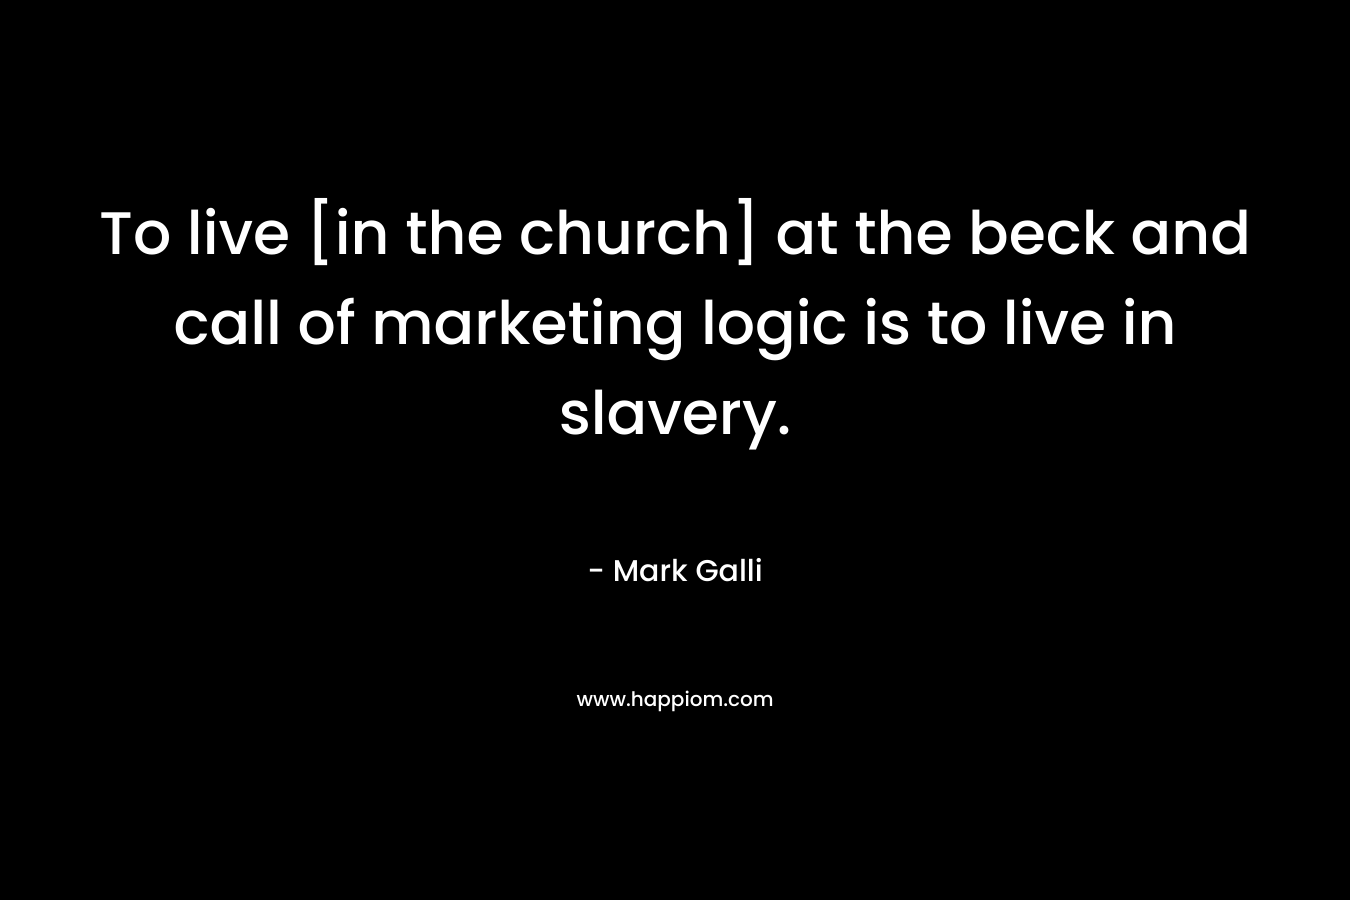 To live [in the church] at the beck and call of marketing logic is to live in slavery.